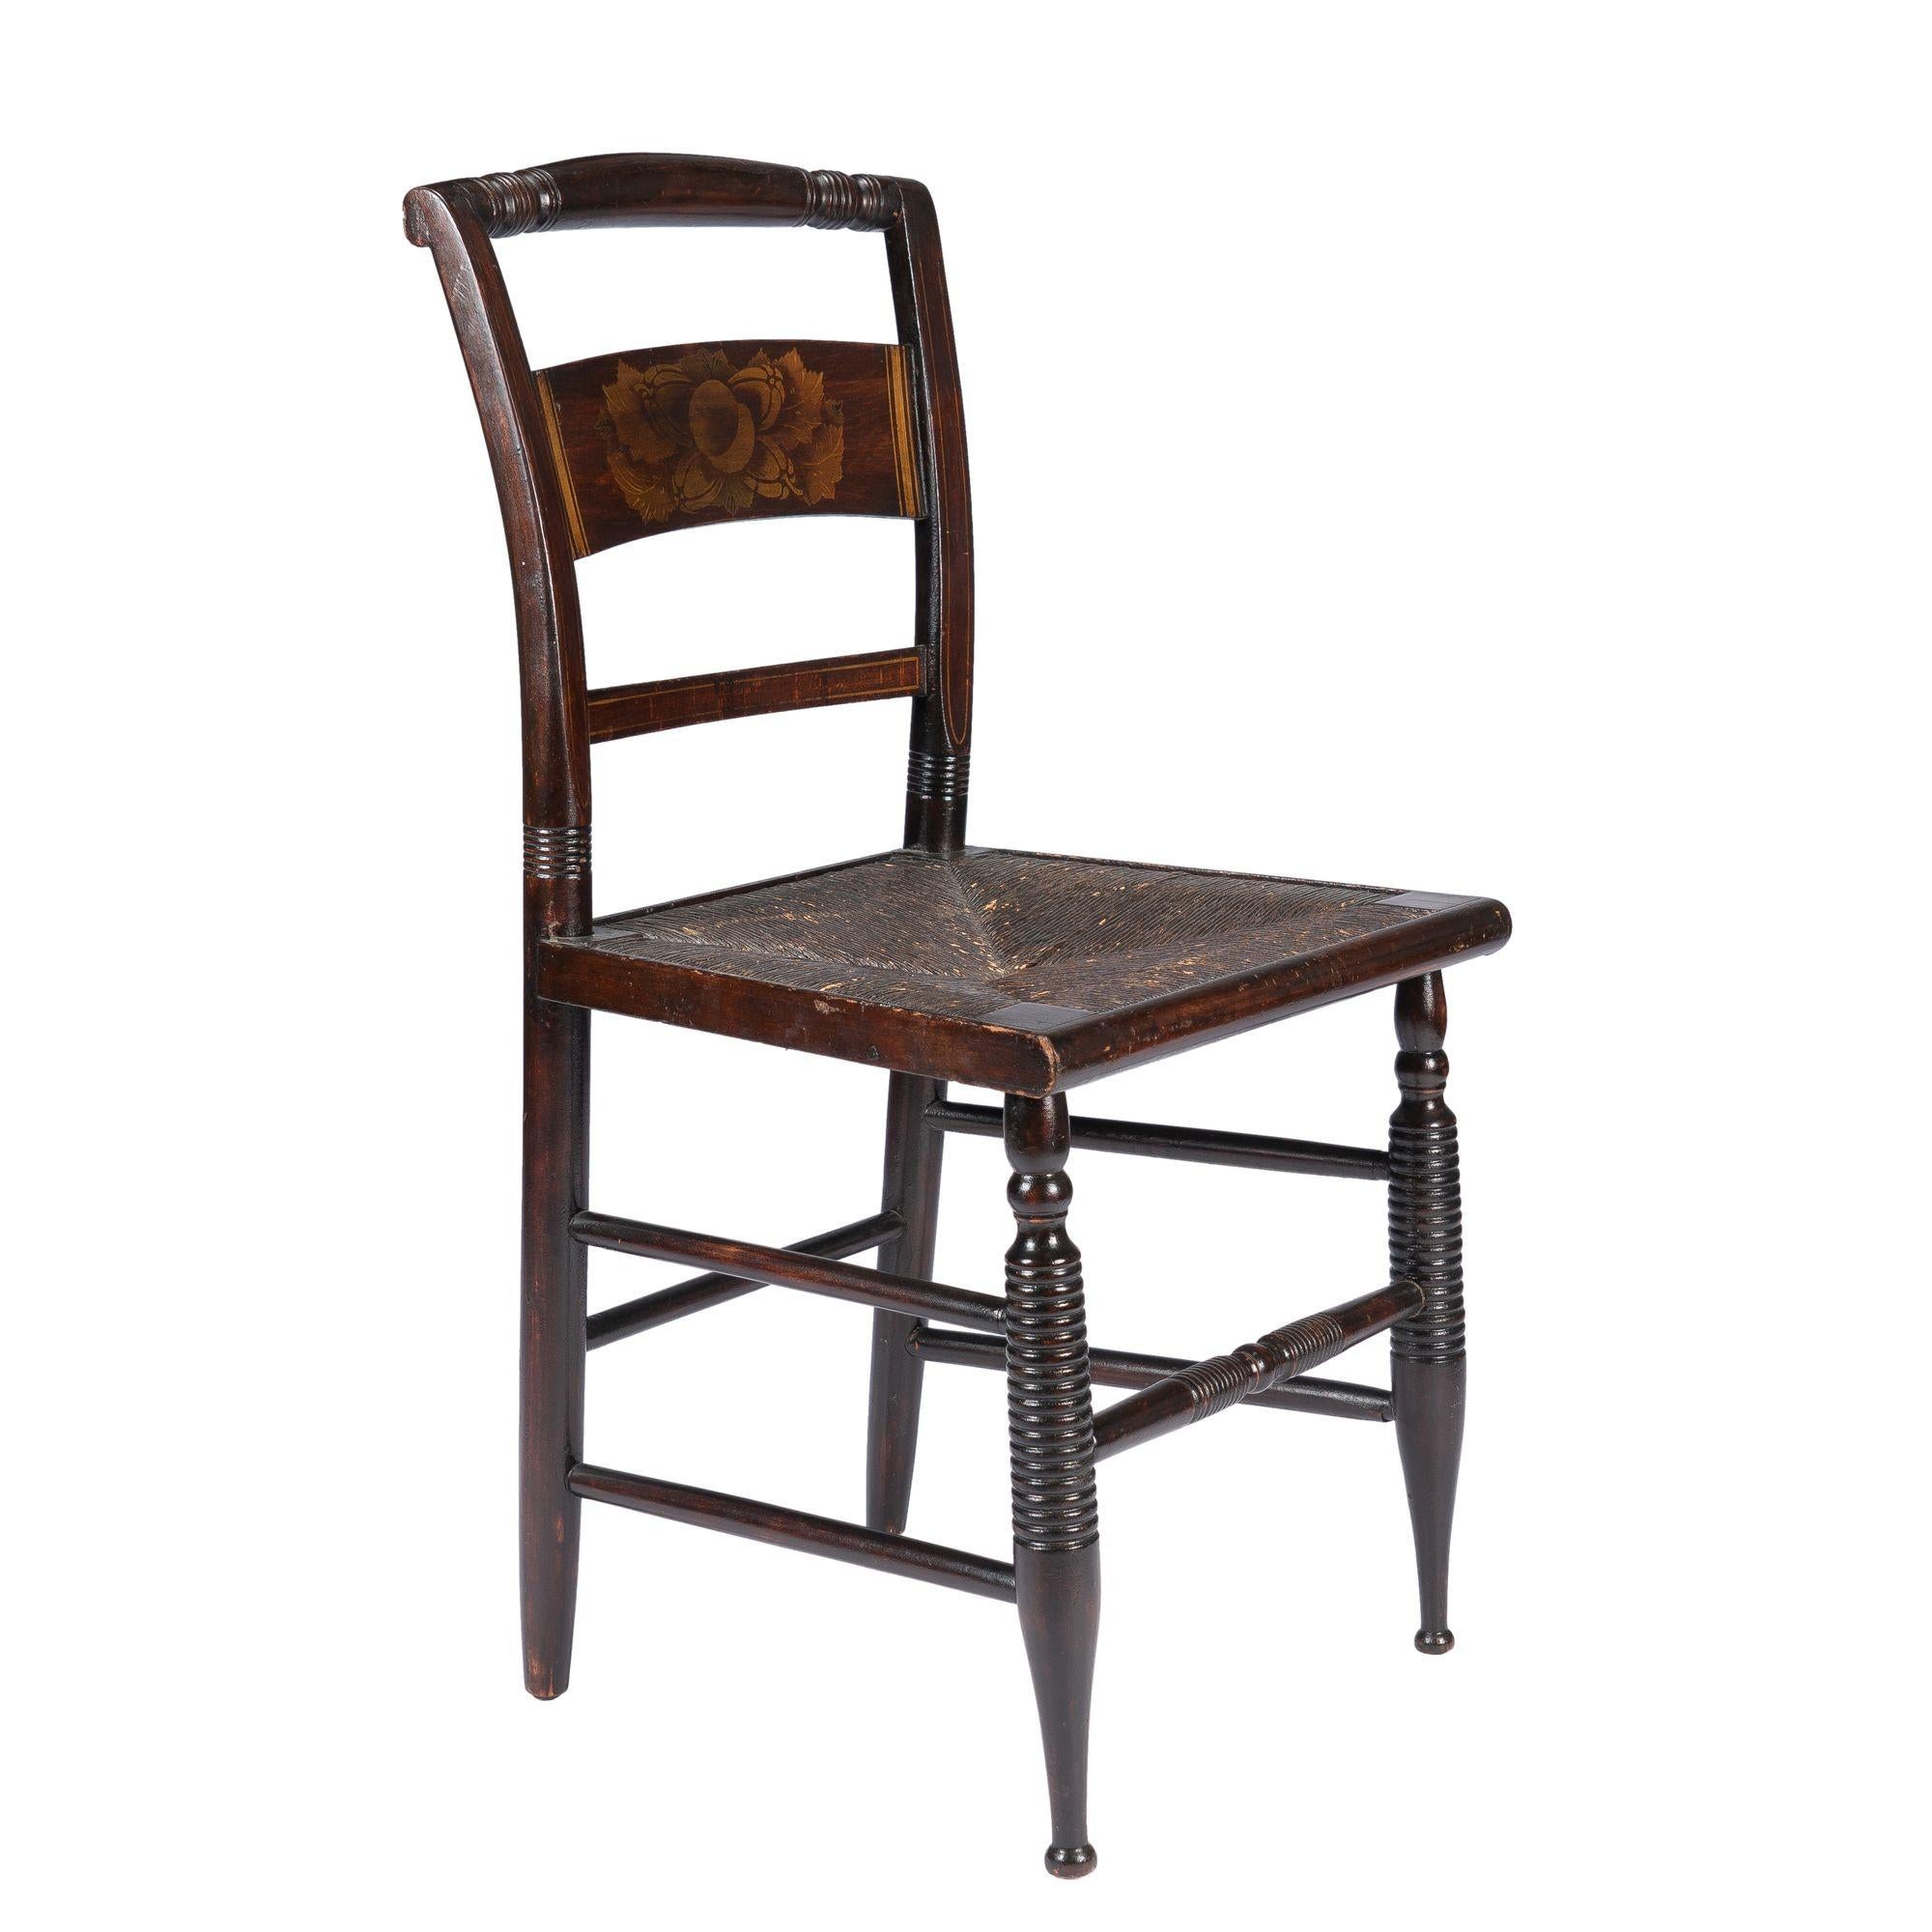 Connecticut Valley Hitchcock rush seat side chair, 1820 2